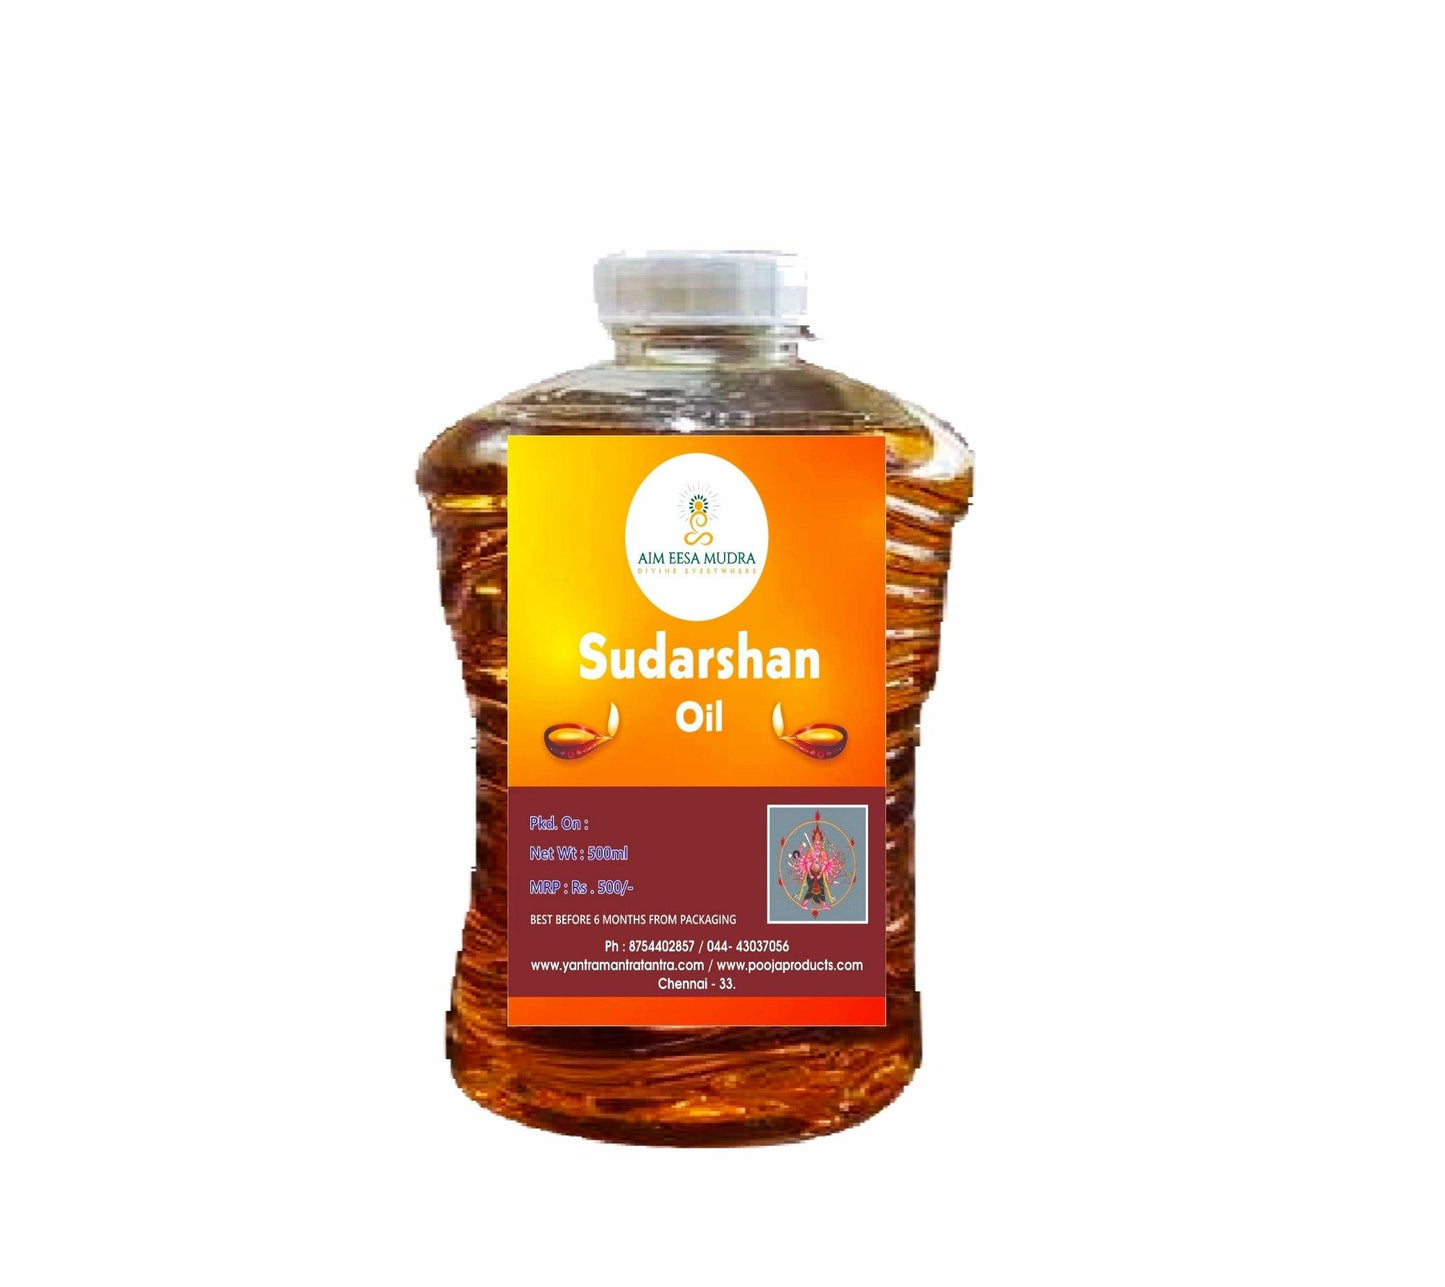 Sudarshan  Oil (500ml)  (𝗧𝗛𝗜𝗦 𝗣𝗥𝗢𝗗𝗨𝗖𝗧 𝗔𝗩𝗔𝗜𝗟𝗕𝗟𝗘 𝗢𝗡𝗟𝗬 𝗜𝗡𝗦𝗜𝗗𝗘 𝗜𝗡𝗗𝗜𝗔) - PoojaProducts.com